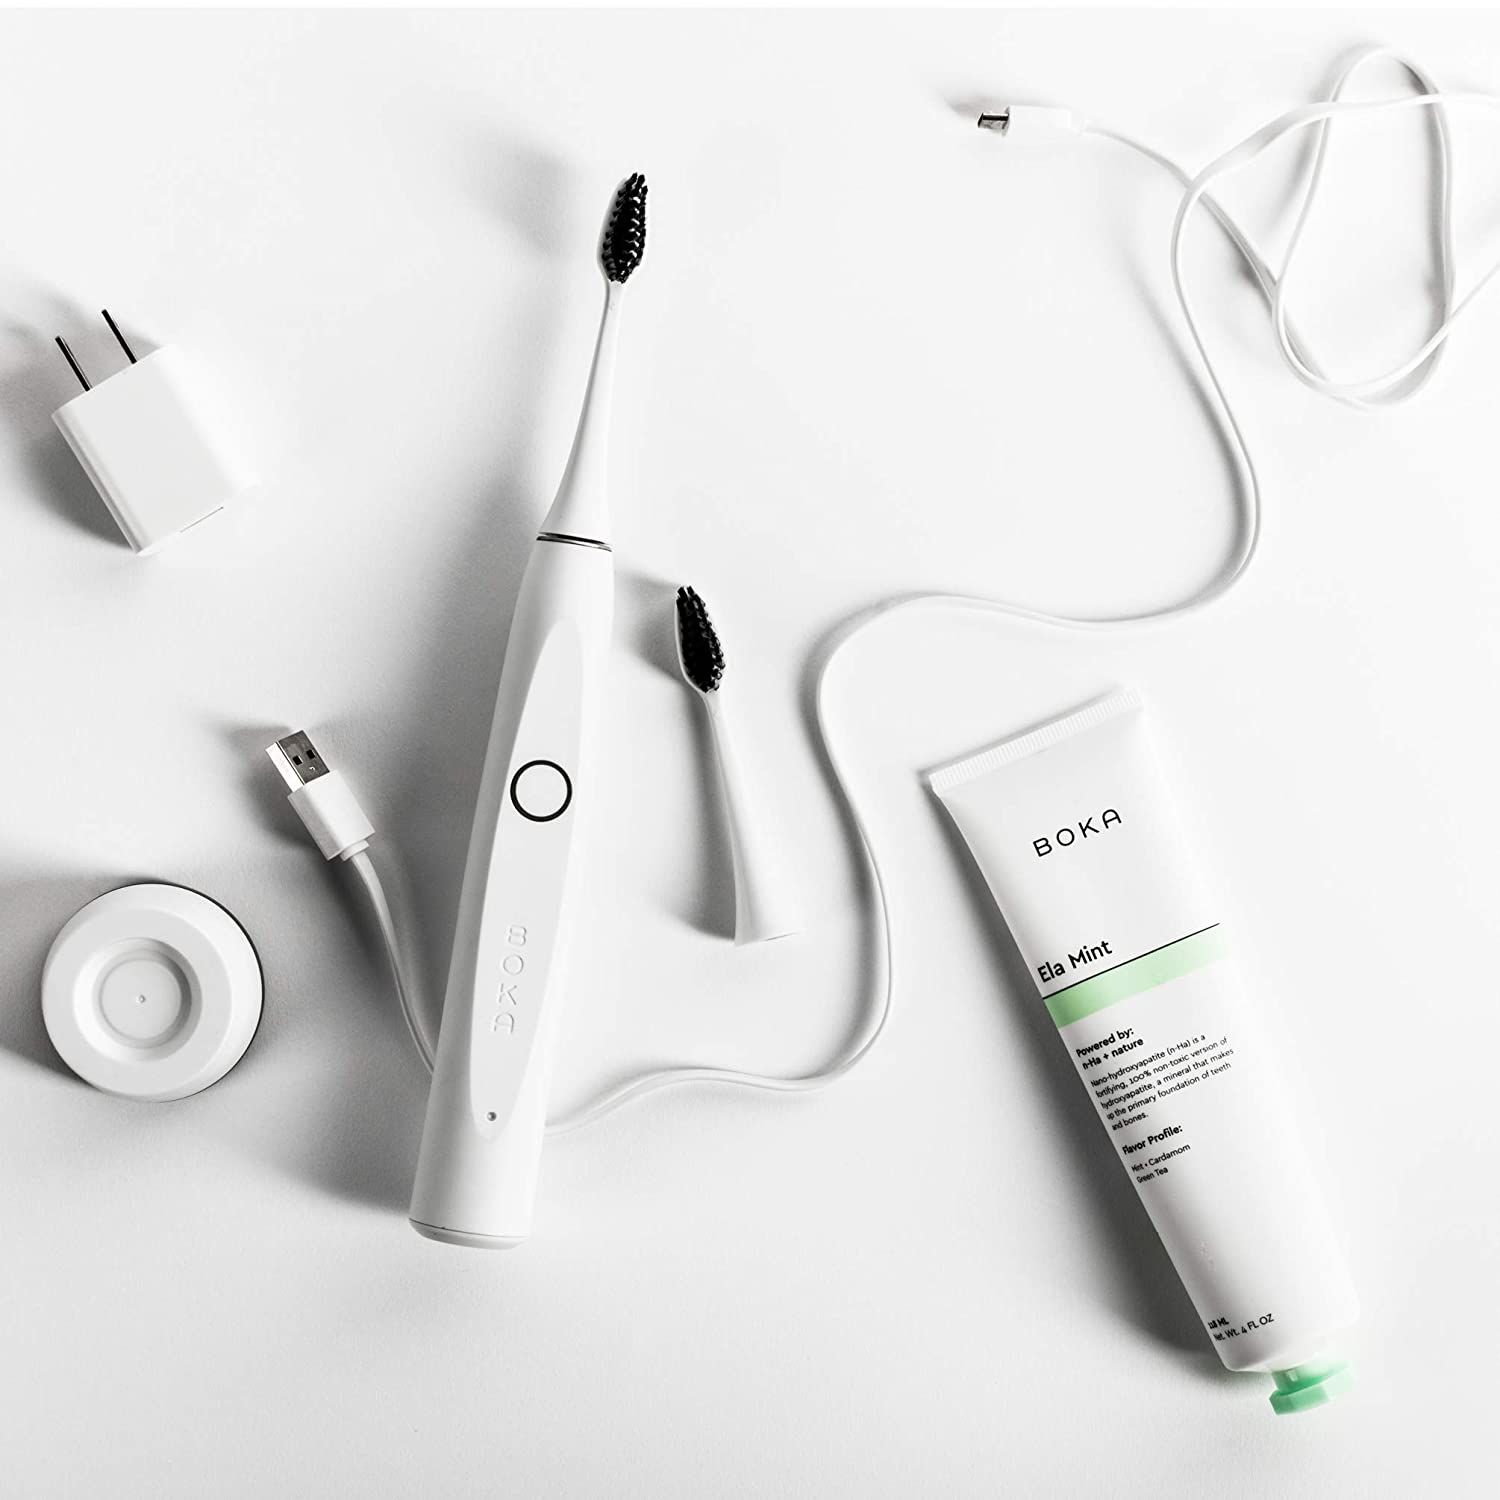 Boka Electric Toothbrush box contents